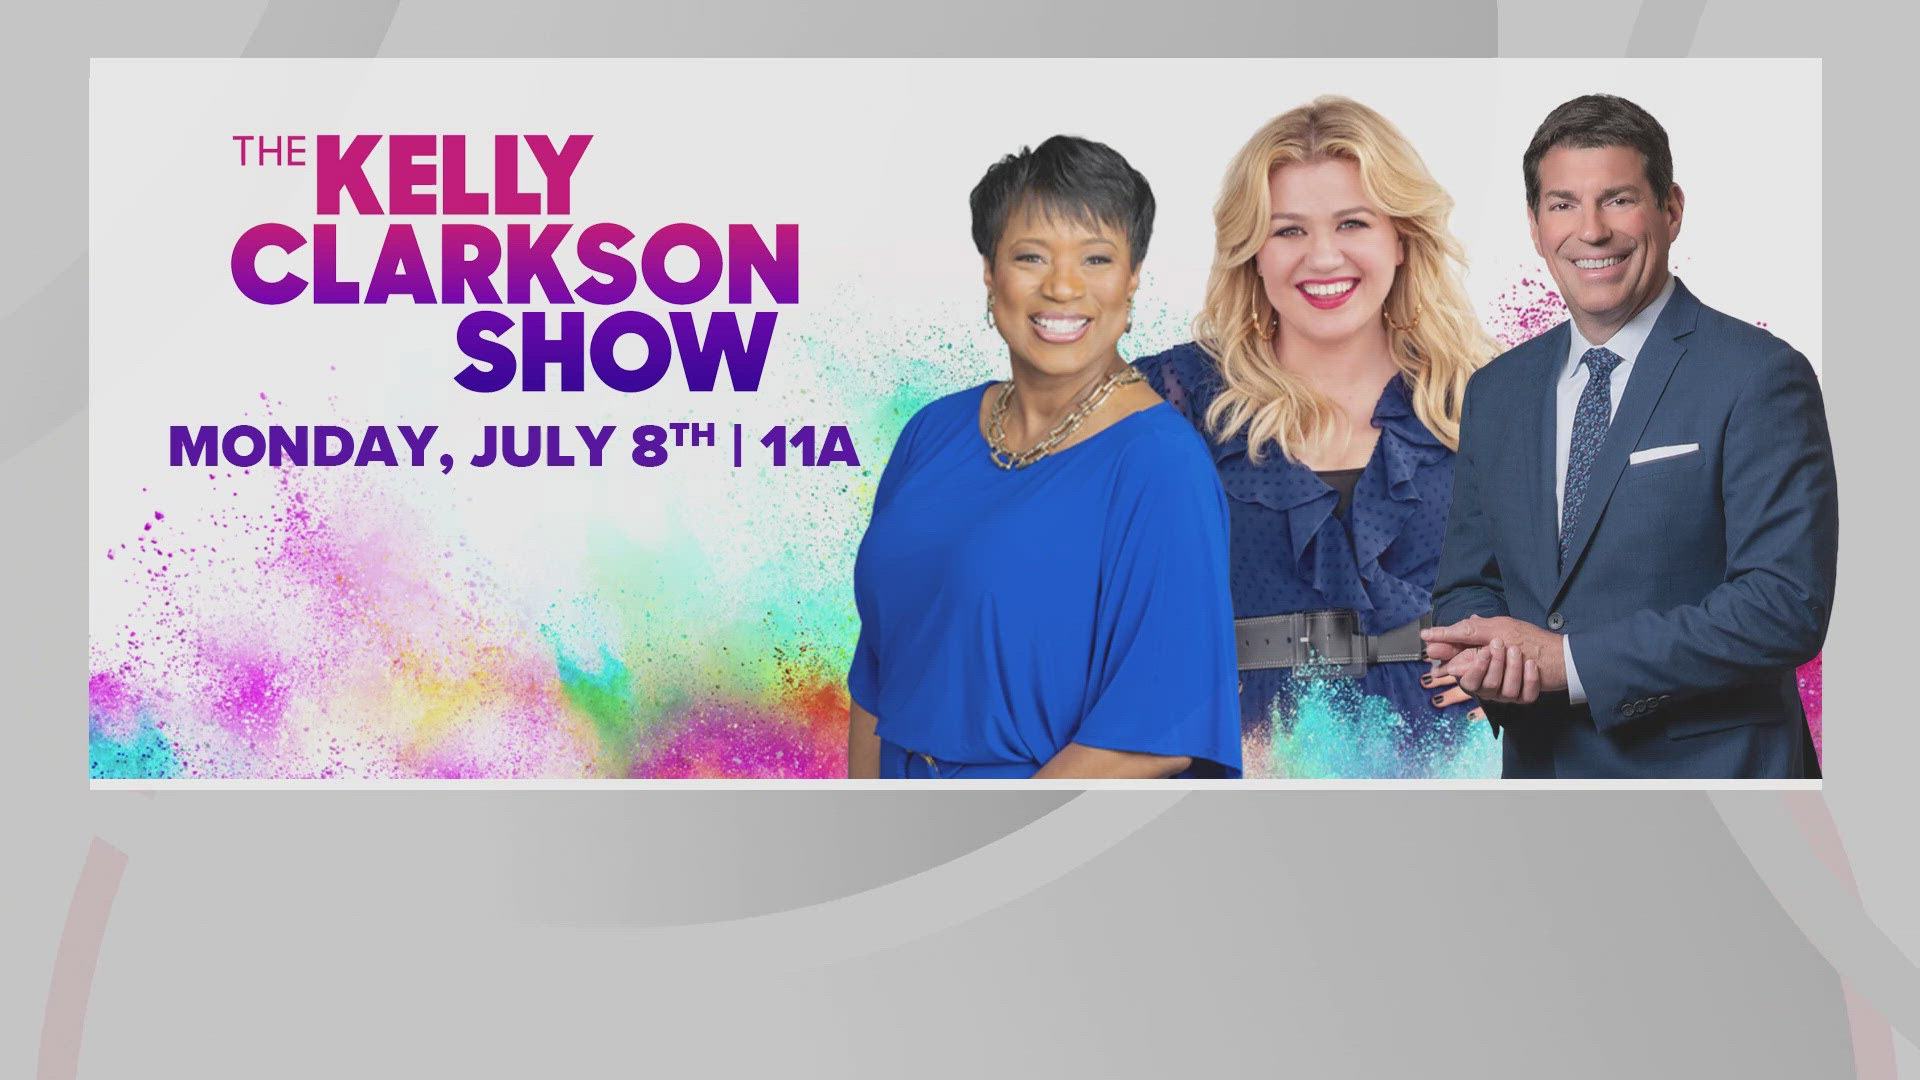 3News’ Danita Harris and Dave Chudowsky will both be featured on The Kelly Clarkson Show in a new episode that’s set to air on WKYC at 11 a.m. on Monday, July 8.